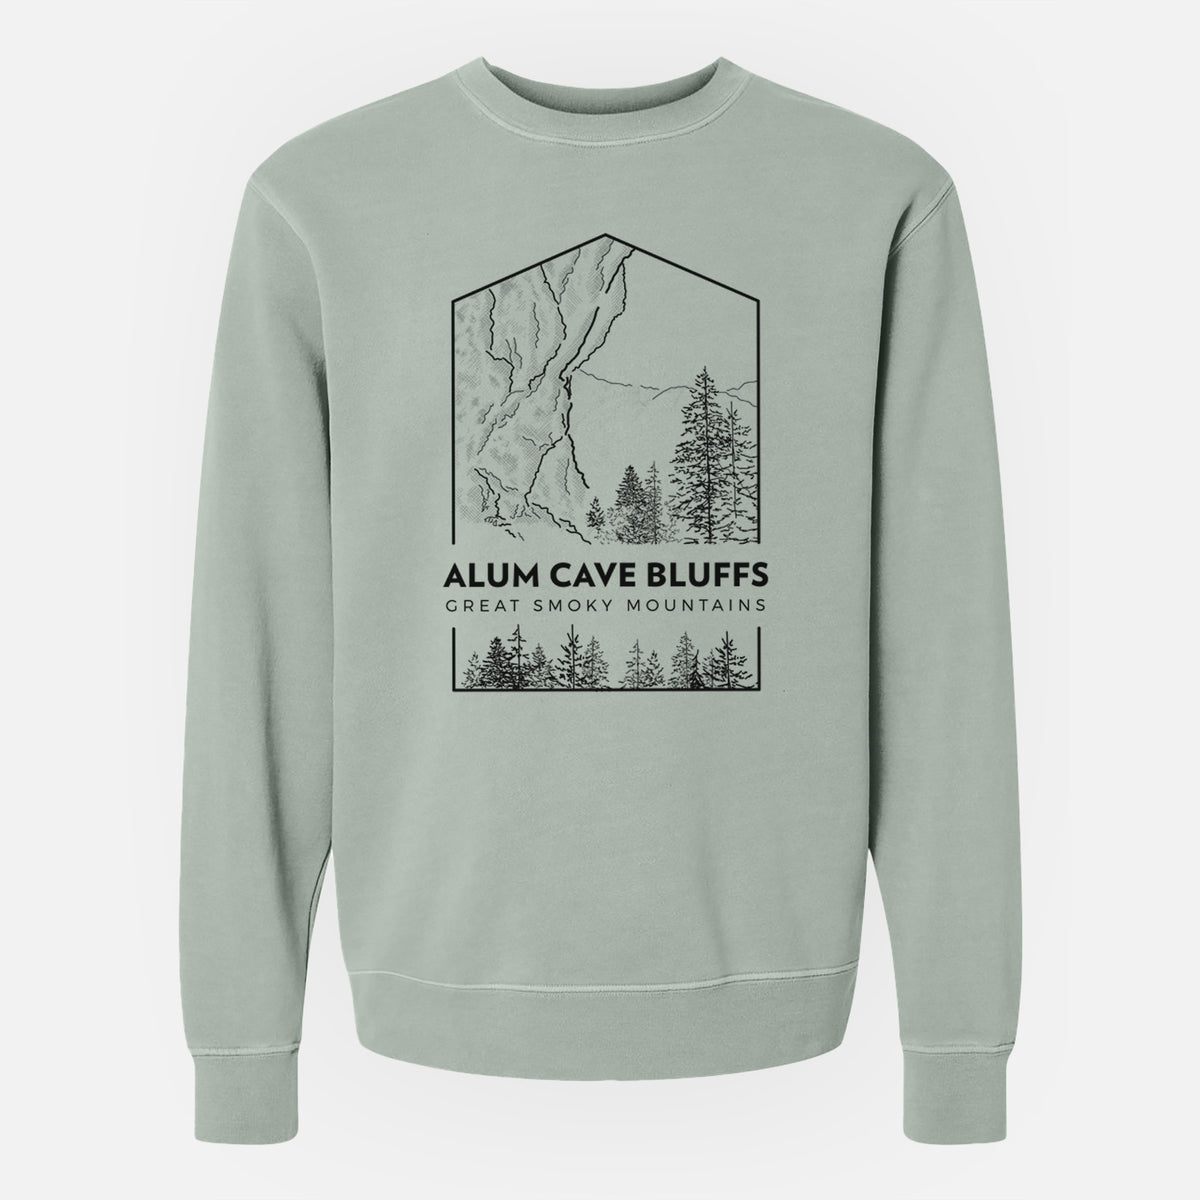 Alum Cave Bluffs - Great Smoky Mountains National Park - Unisex Pigment Dyed Crew Sweatshirt